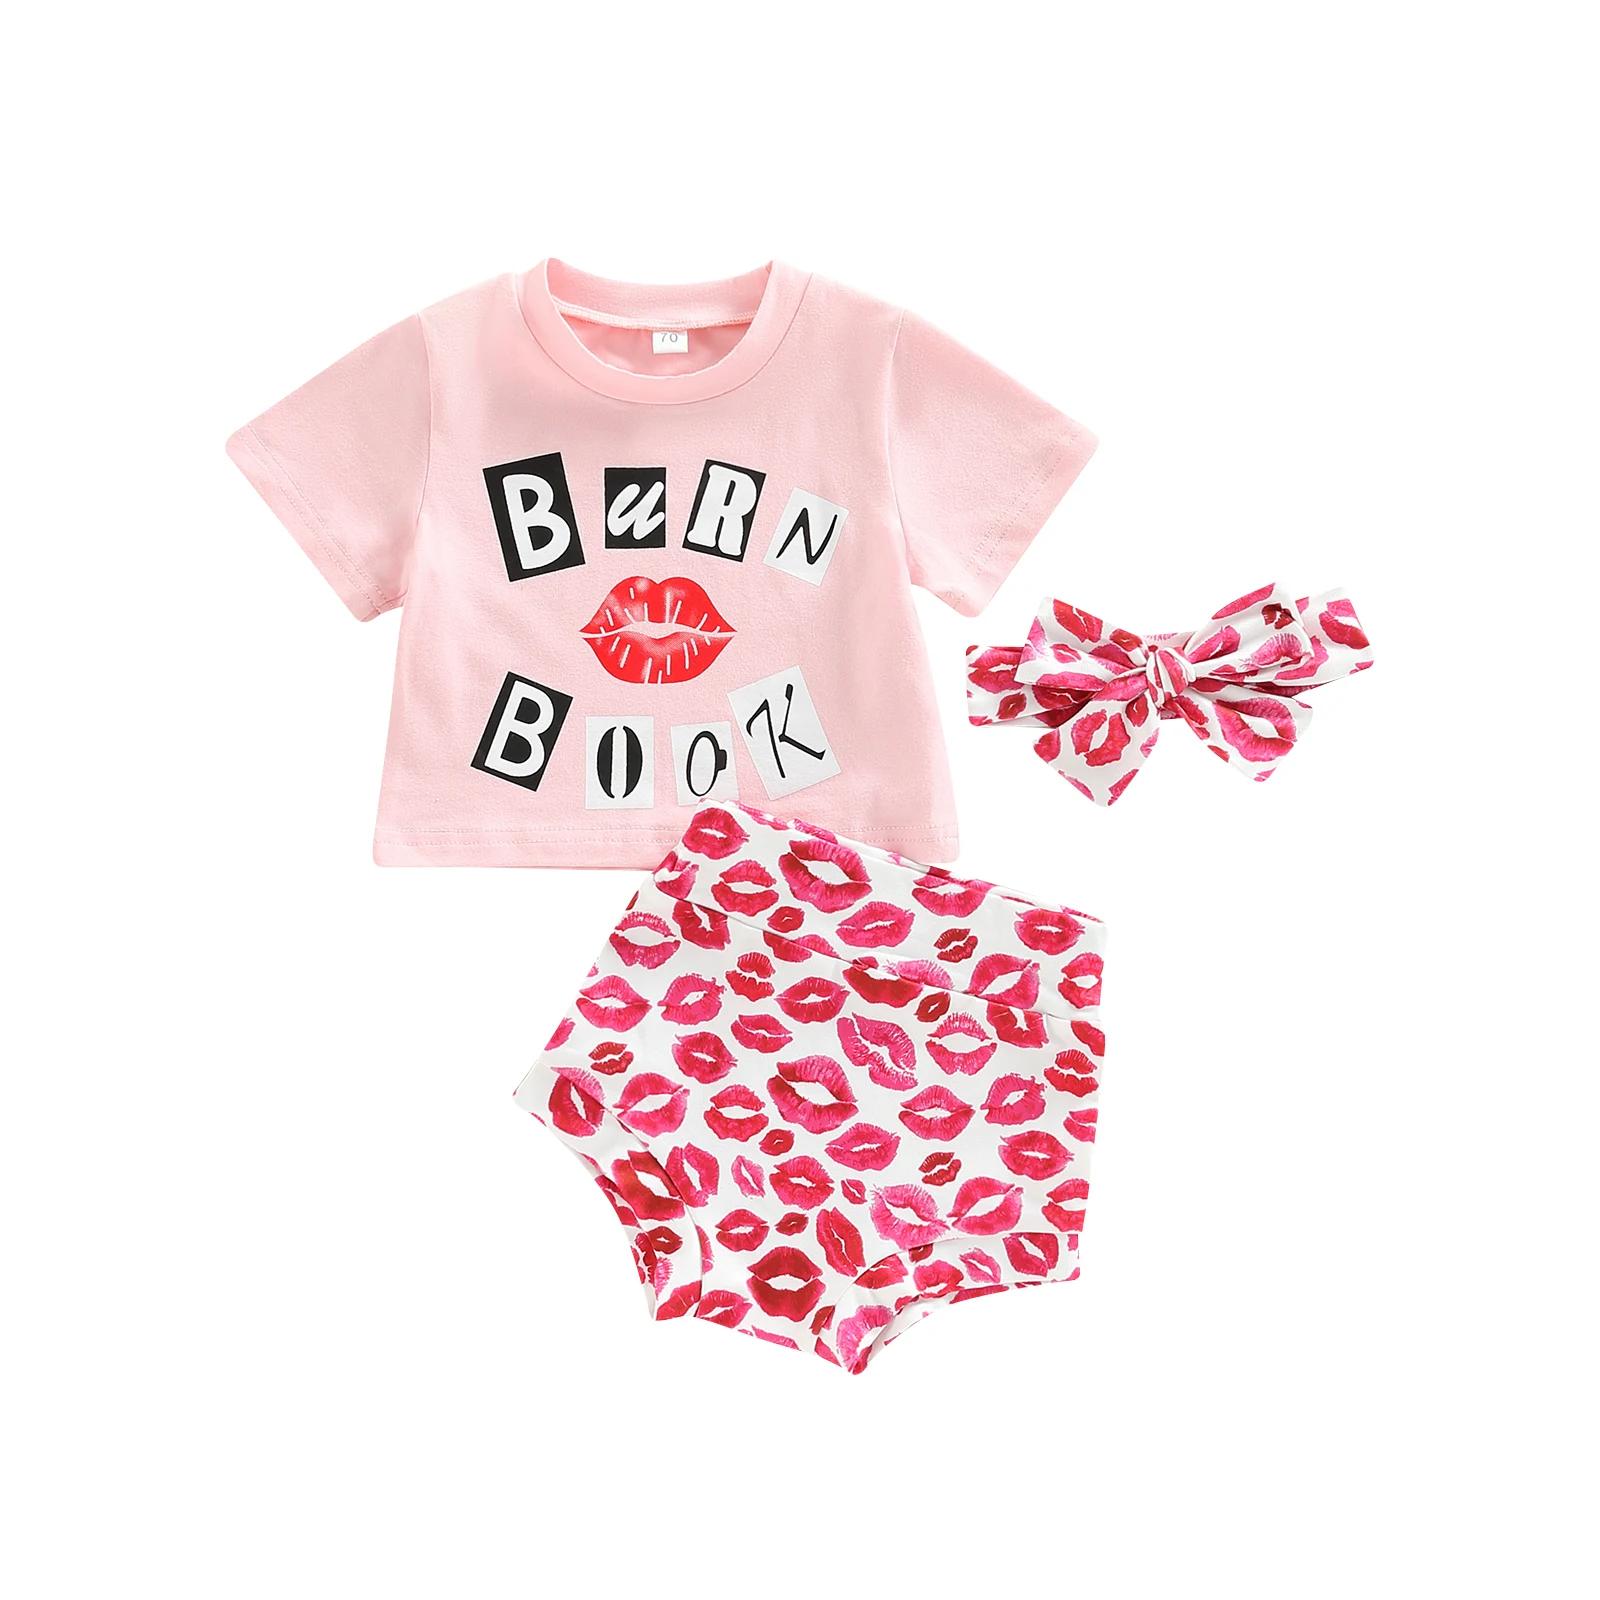 Infant Girls Valentines Day Outfits, Letter Print Round Neck Short Sleeve T-Shirts Tops + Lips Print Shorts + Headba